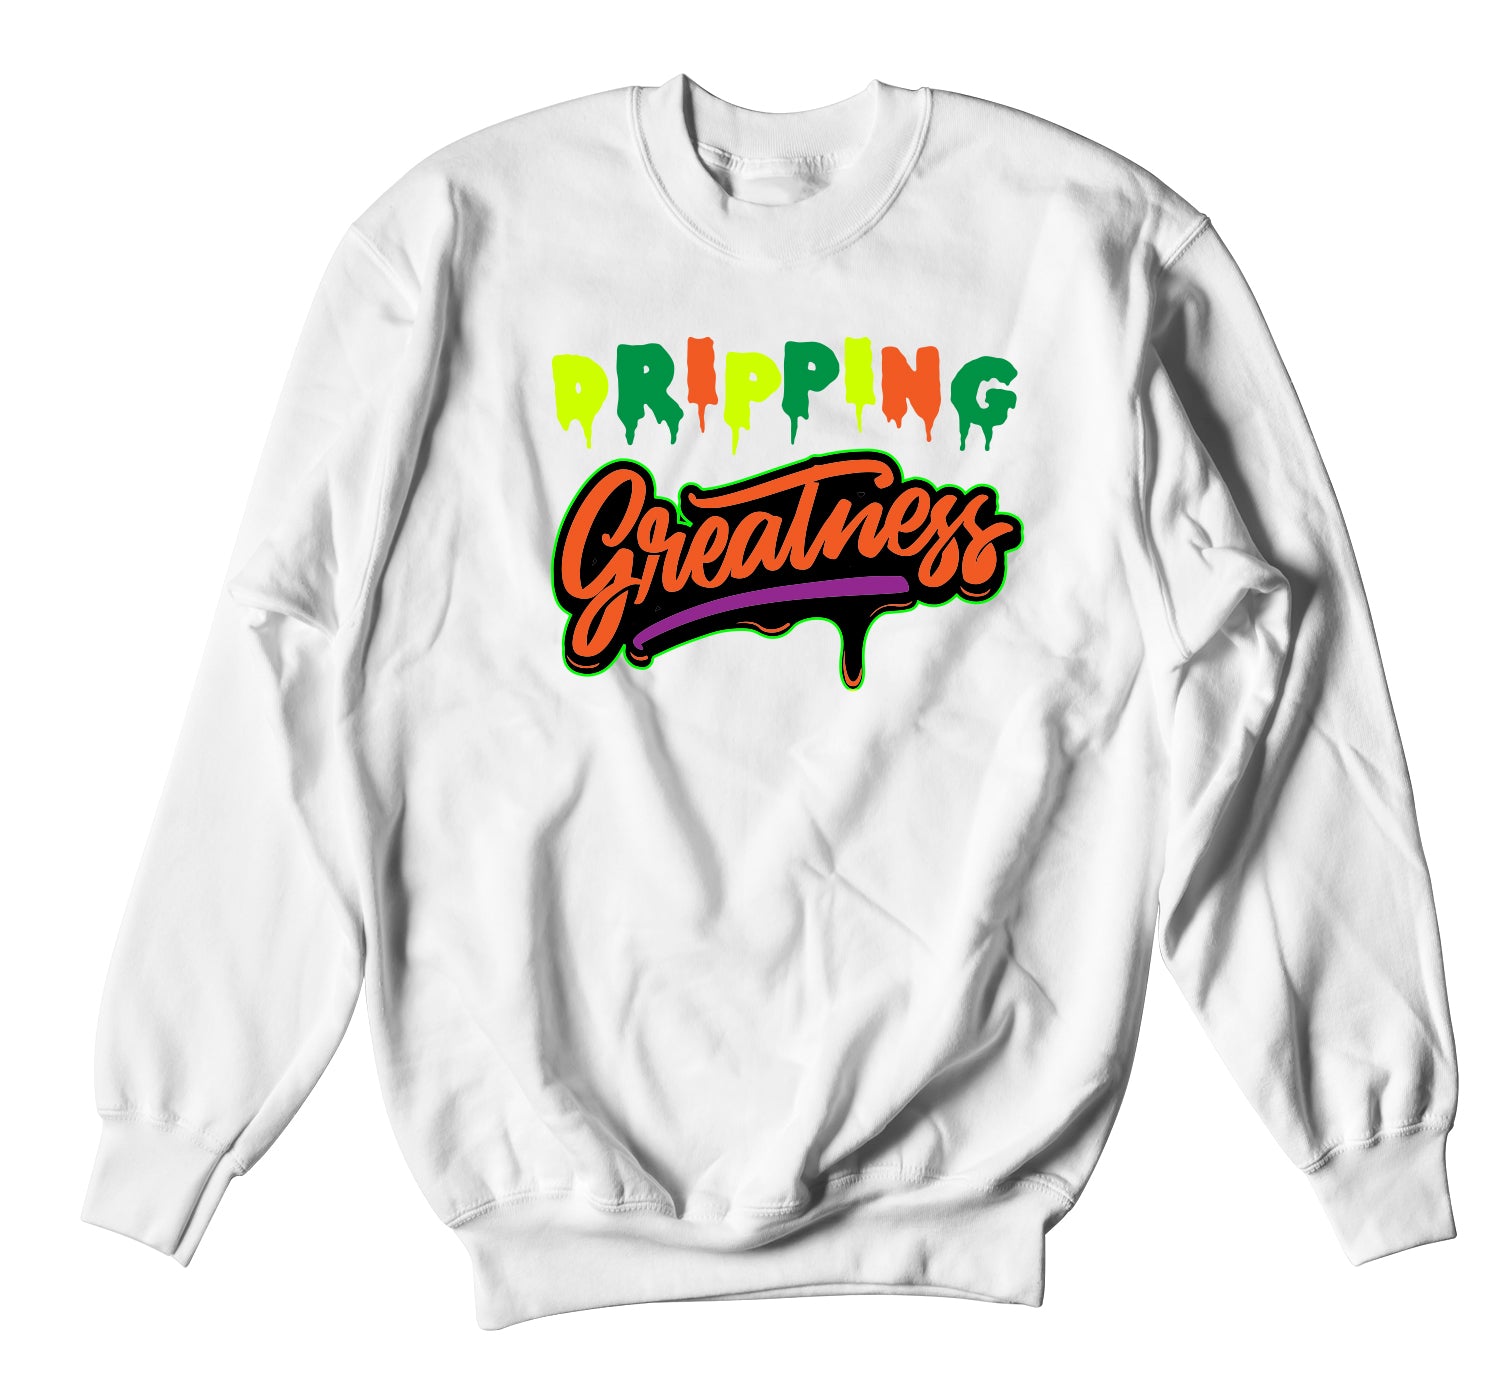 All Star 2020 PG 4 Sweater  - Dripping Greatness - White